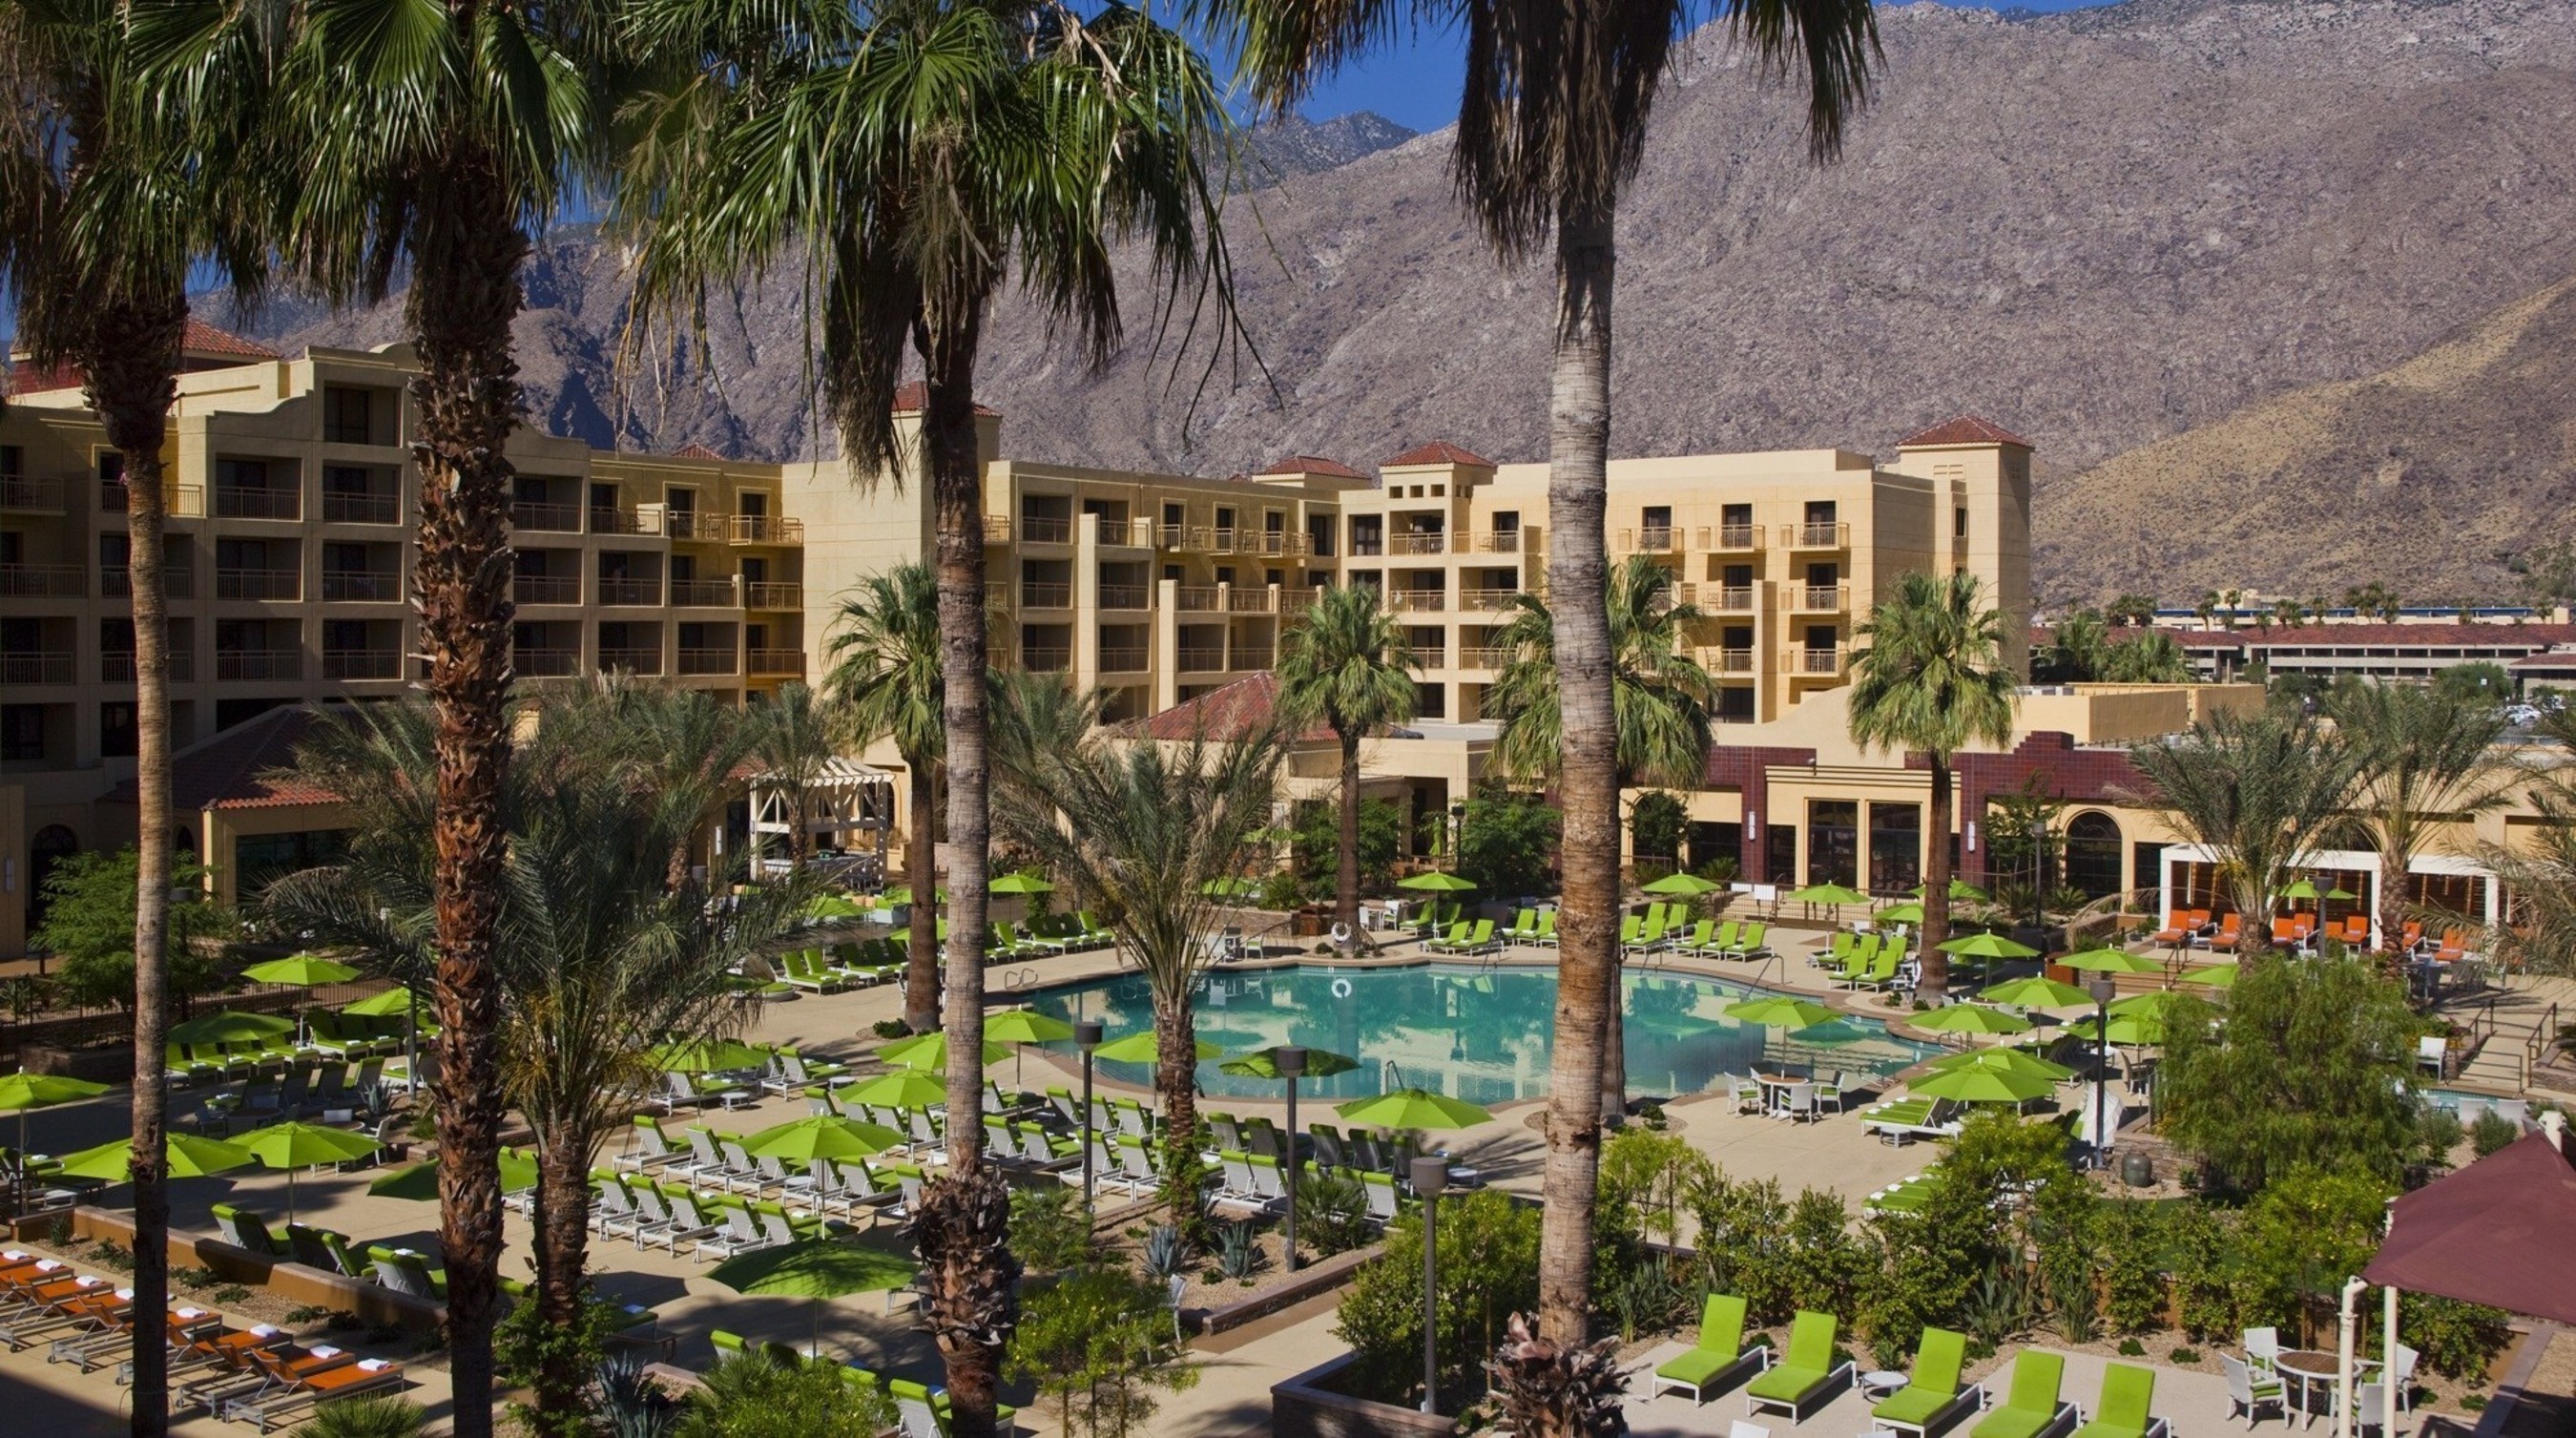 Renaissance Palm Springs Hotel is offering special perks for events booked before the end of the year as part of its Extraordinary Events in Palm Springs package. For information, visit www.marriott.com/PSPBR or call 1-760-322-6000.